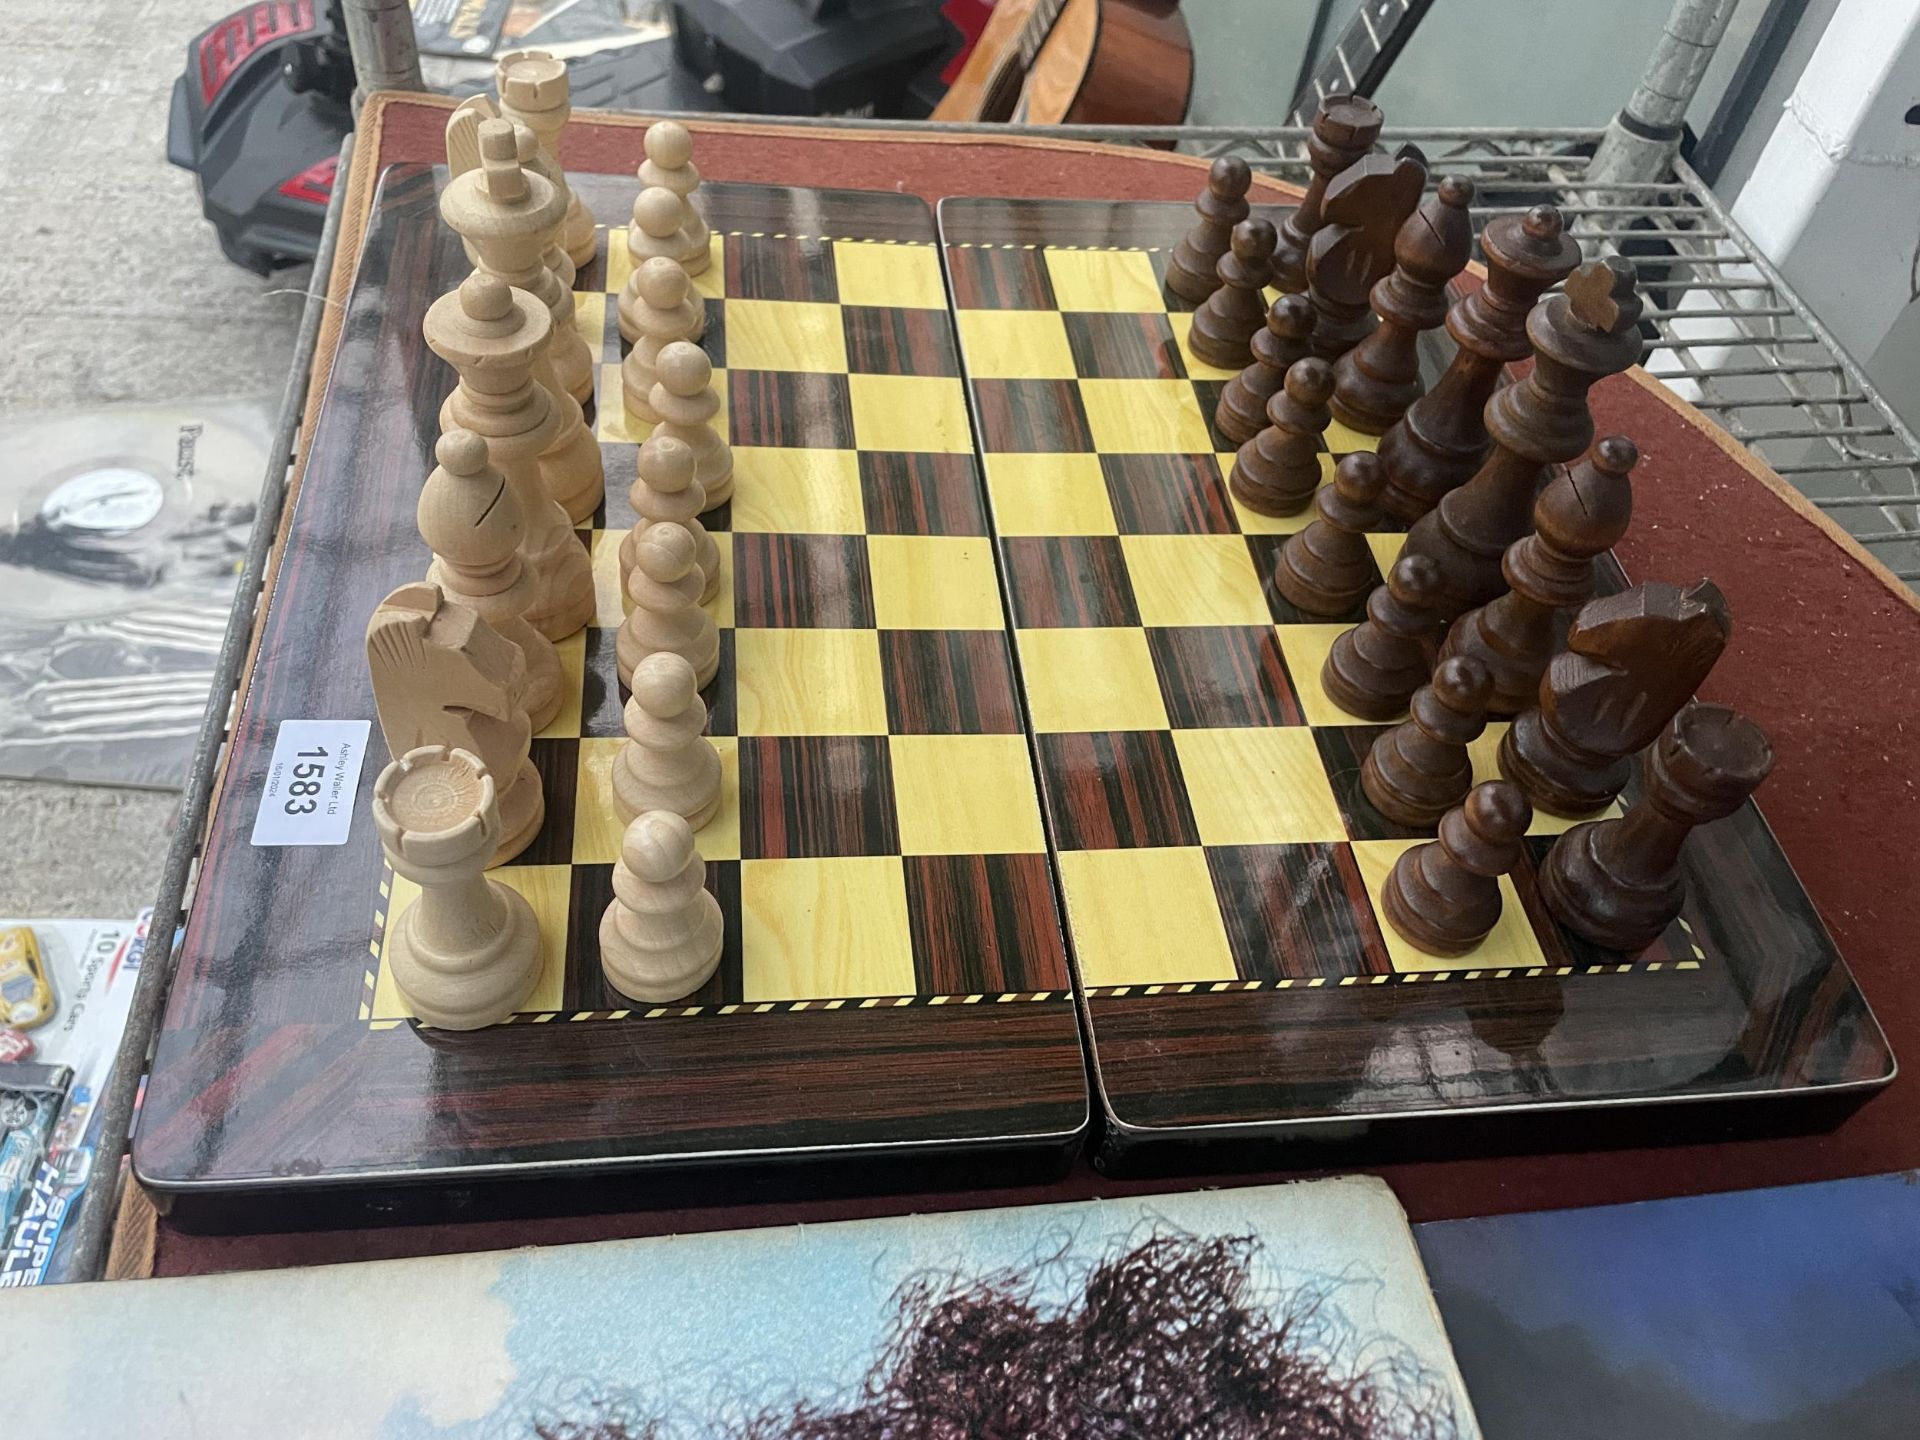 A FOLDING CHESS BOARD WITH A FULL SET OF CHESS PIECES - Image 2 of 3